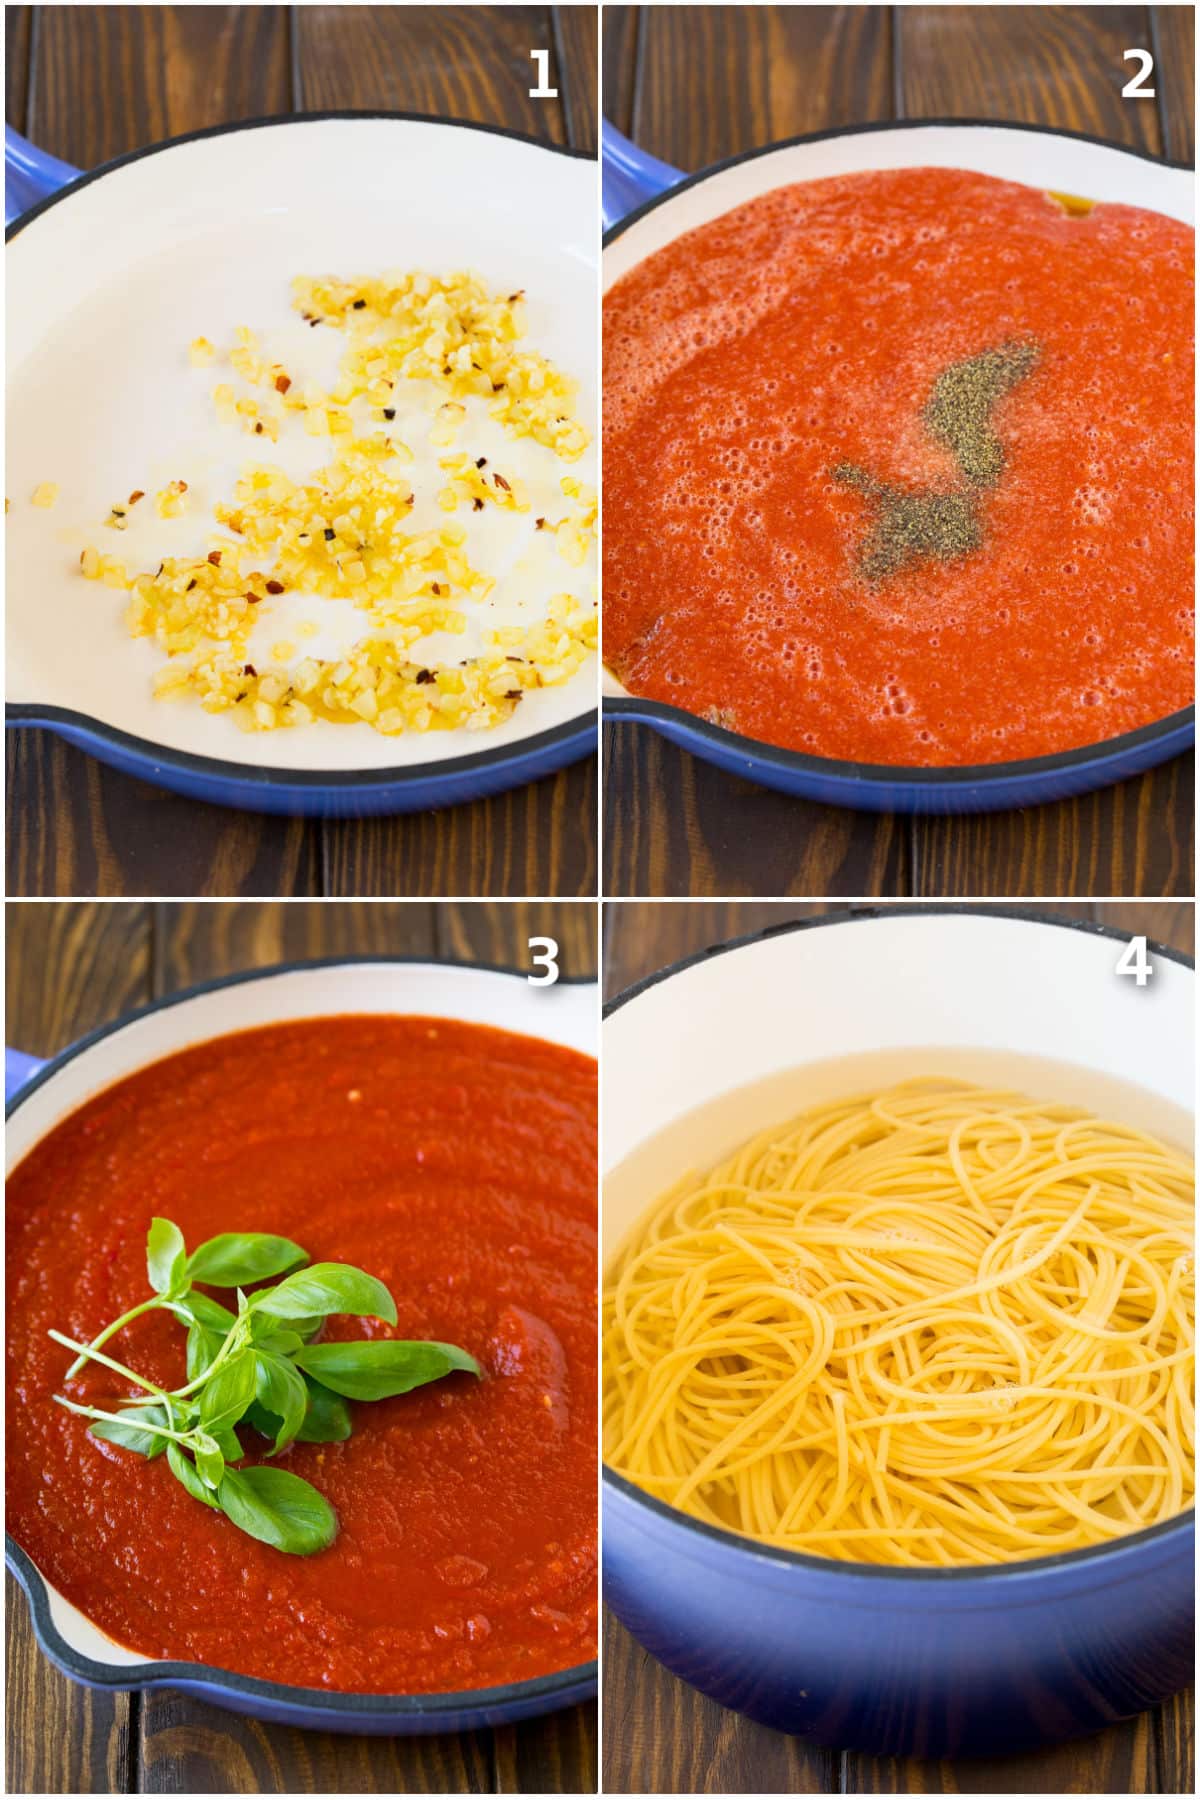 Process shots showing tomato sauce being made and pasta in a pot.